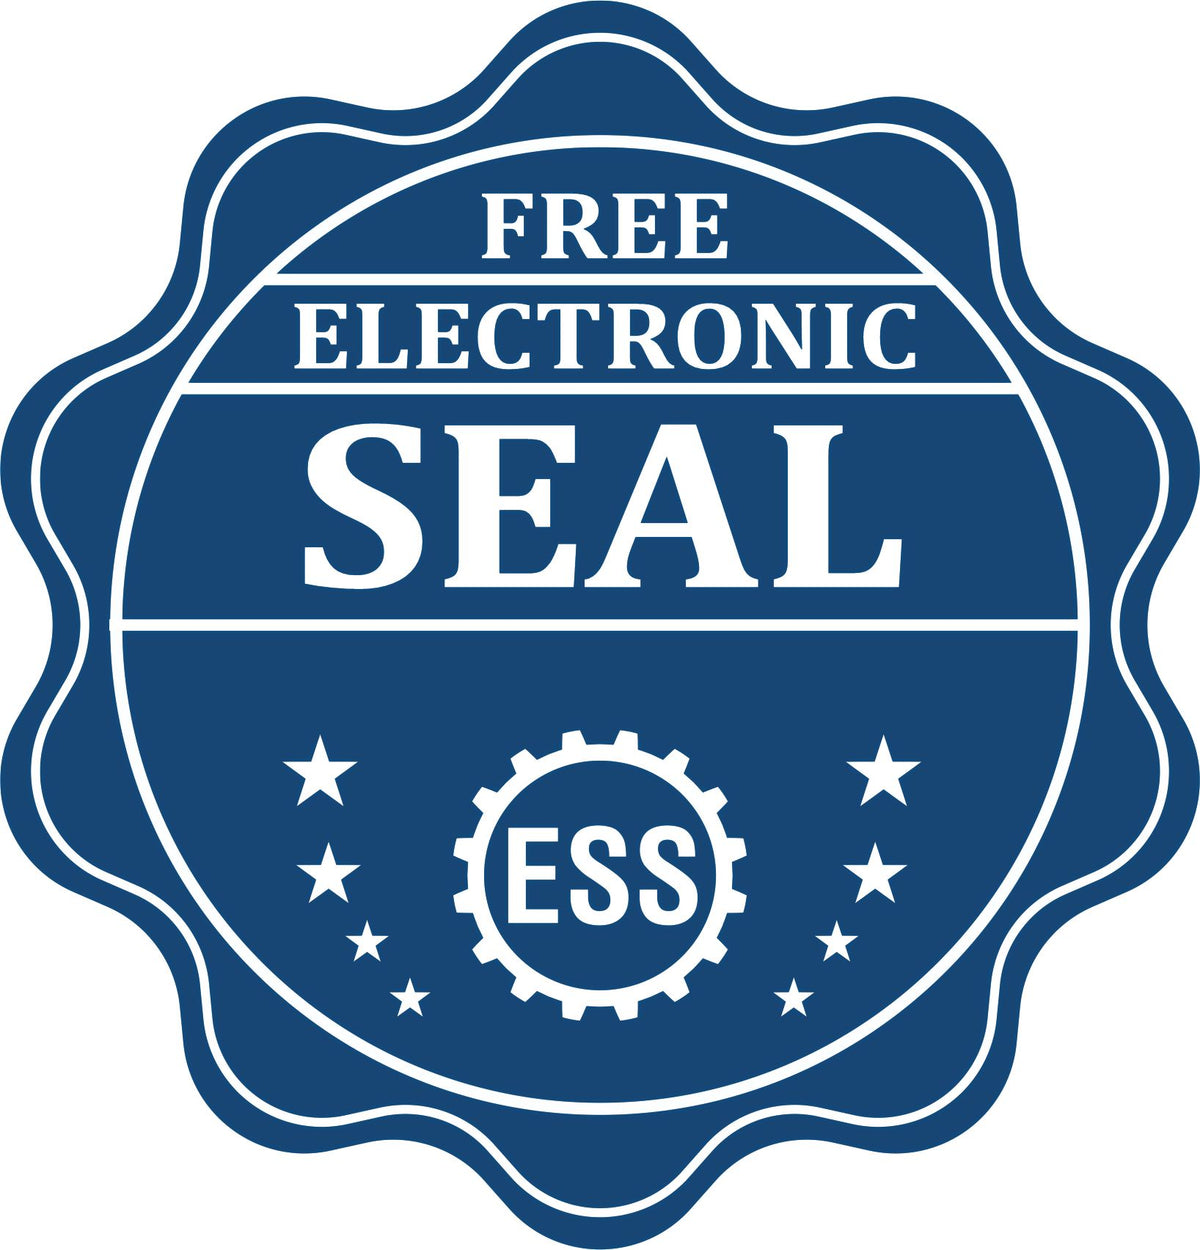 A badge showing a free electronic seal for the Hybrid West Virginia Geologist Seal with stars and the ESS gear on the emblem.